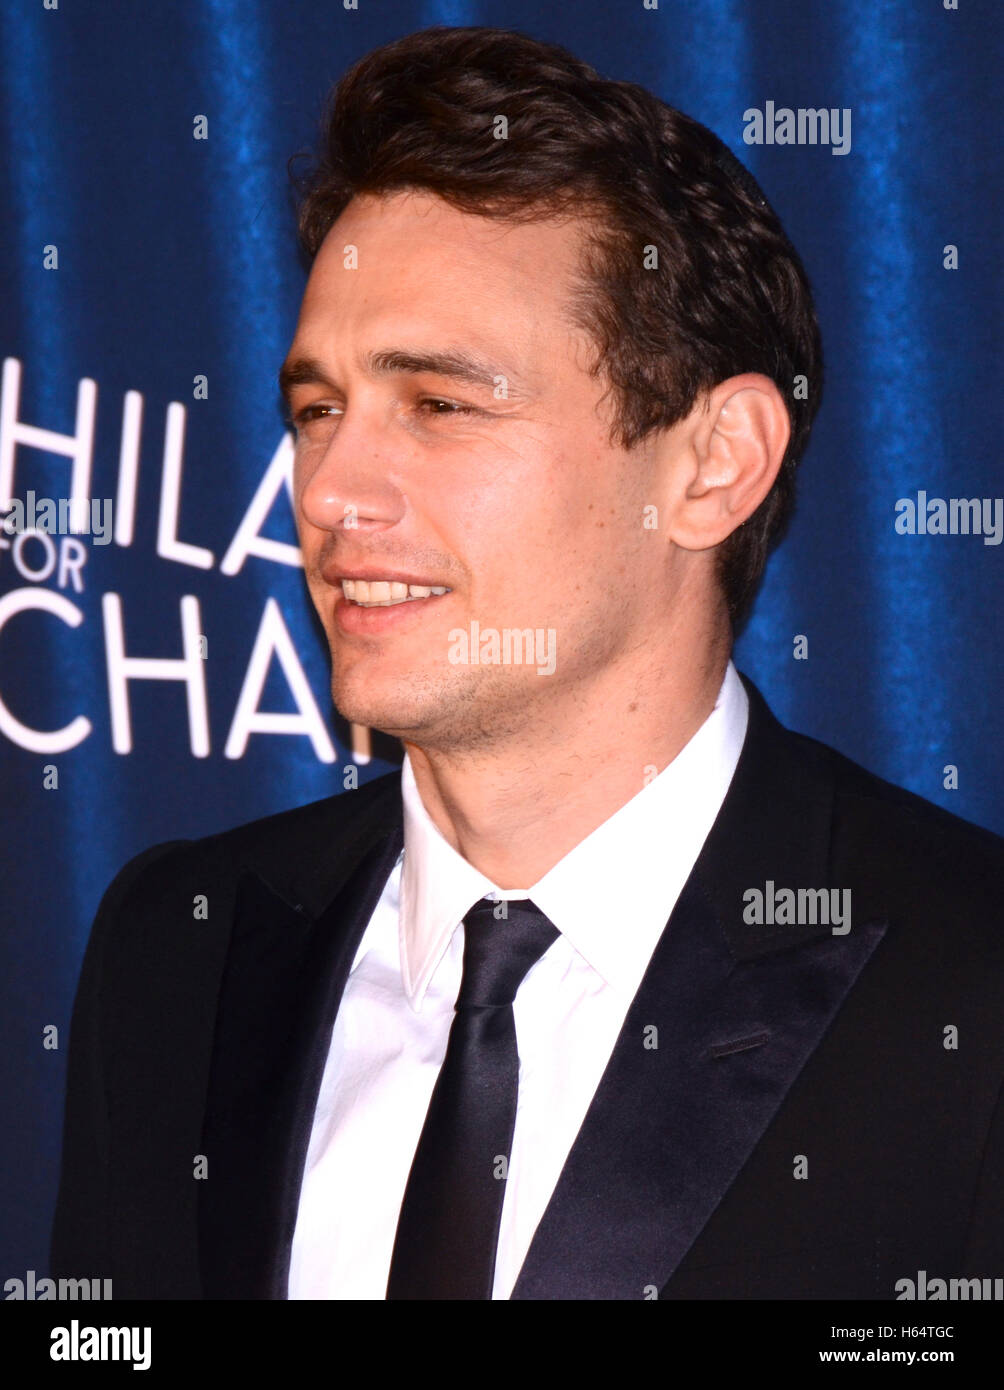 James Franco attends 4th Annual Hilarity For Charity Variety Show: James  Franco's Bar Mitzvah benifiting the Alzeimer's Association presented by  Funny Or Die and go90 at The Hollywood Paladium in Hollywood California